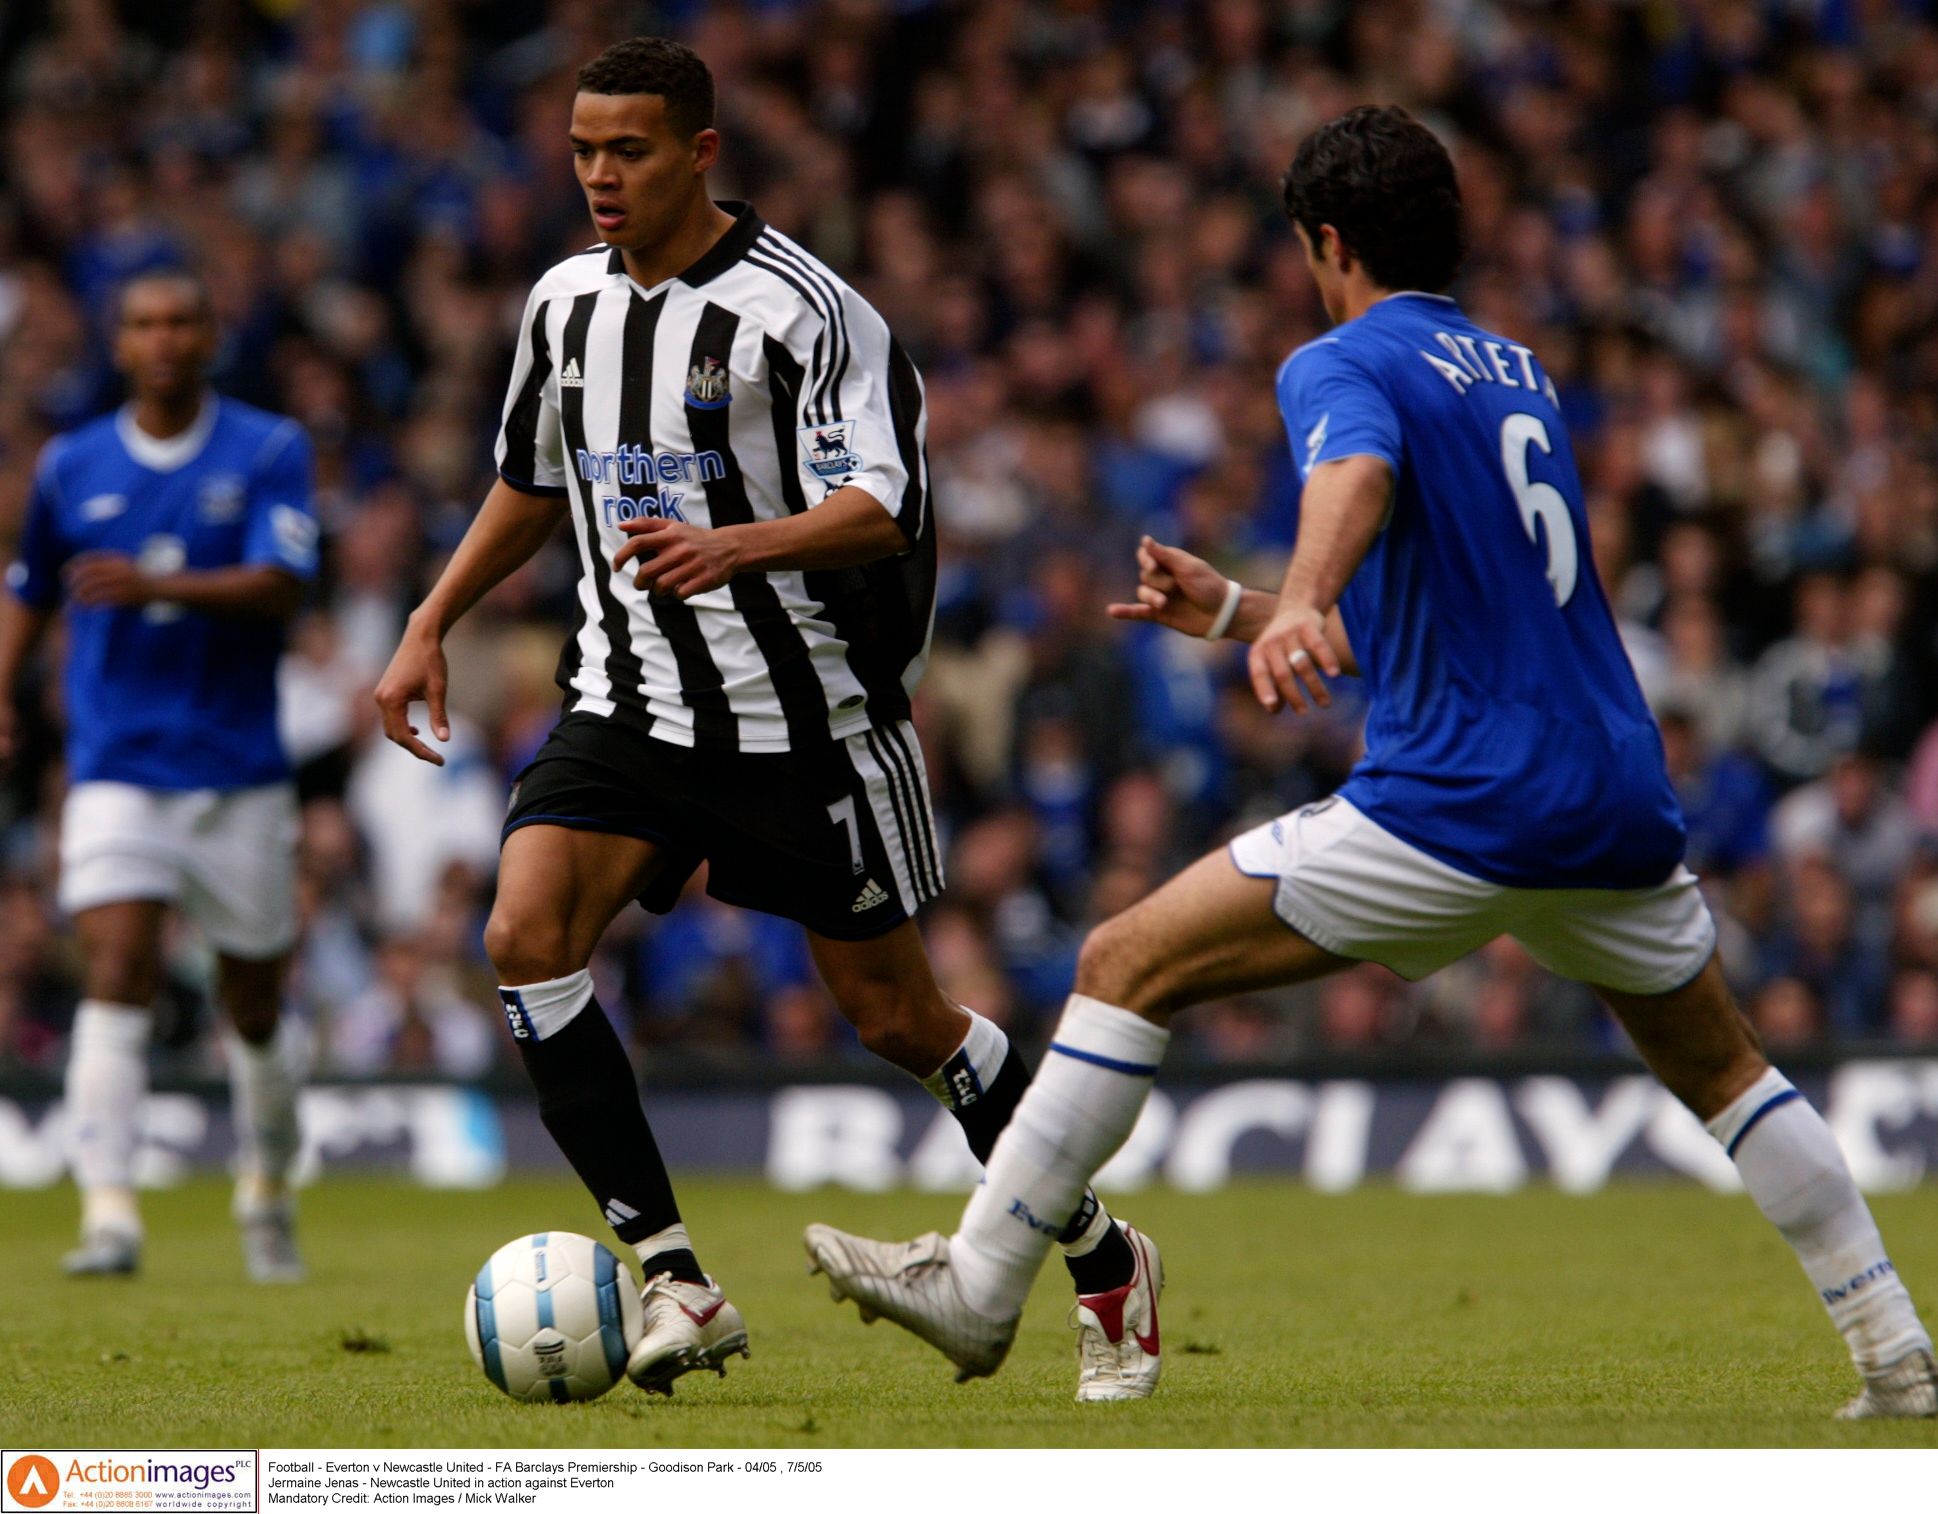 Football - Everton v Newcastle United - FA Barclays Premiership - Goodison Park - 04/05 , 7/5/05 
Jermaine Jenas - Newcastle United in action against Everton  
Mandatory Credit: Action Images / Mick Walker 
NO ONLINE/INTERNET USE WITHOUT A LICENCE FROM THE FOOTBALL DATA CO LTD. FOR LICENCE ENQUIRIES PLEASE TELEPHONE +44 207 298 1656.